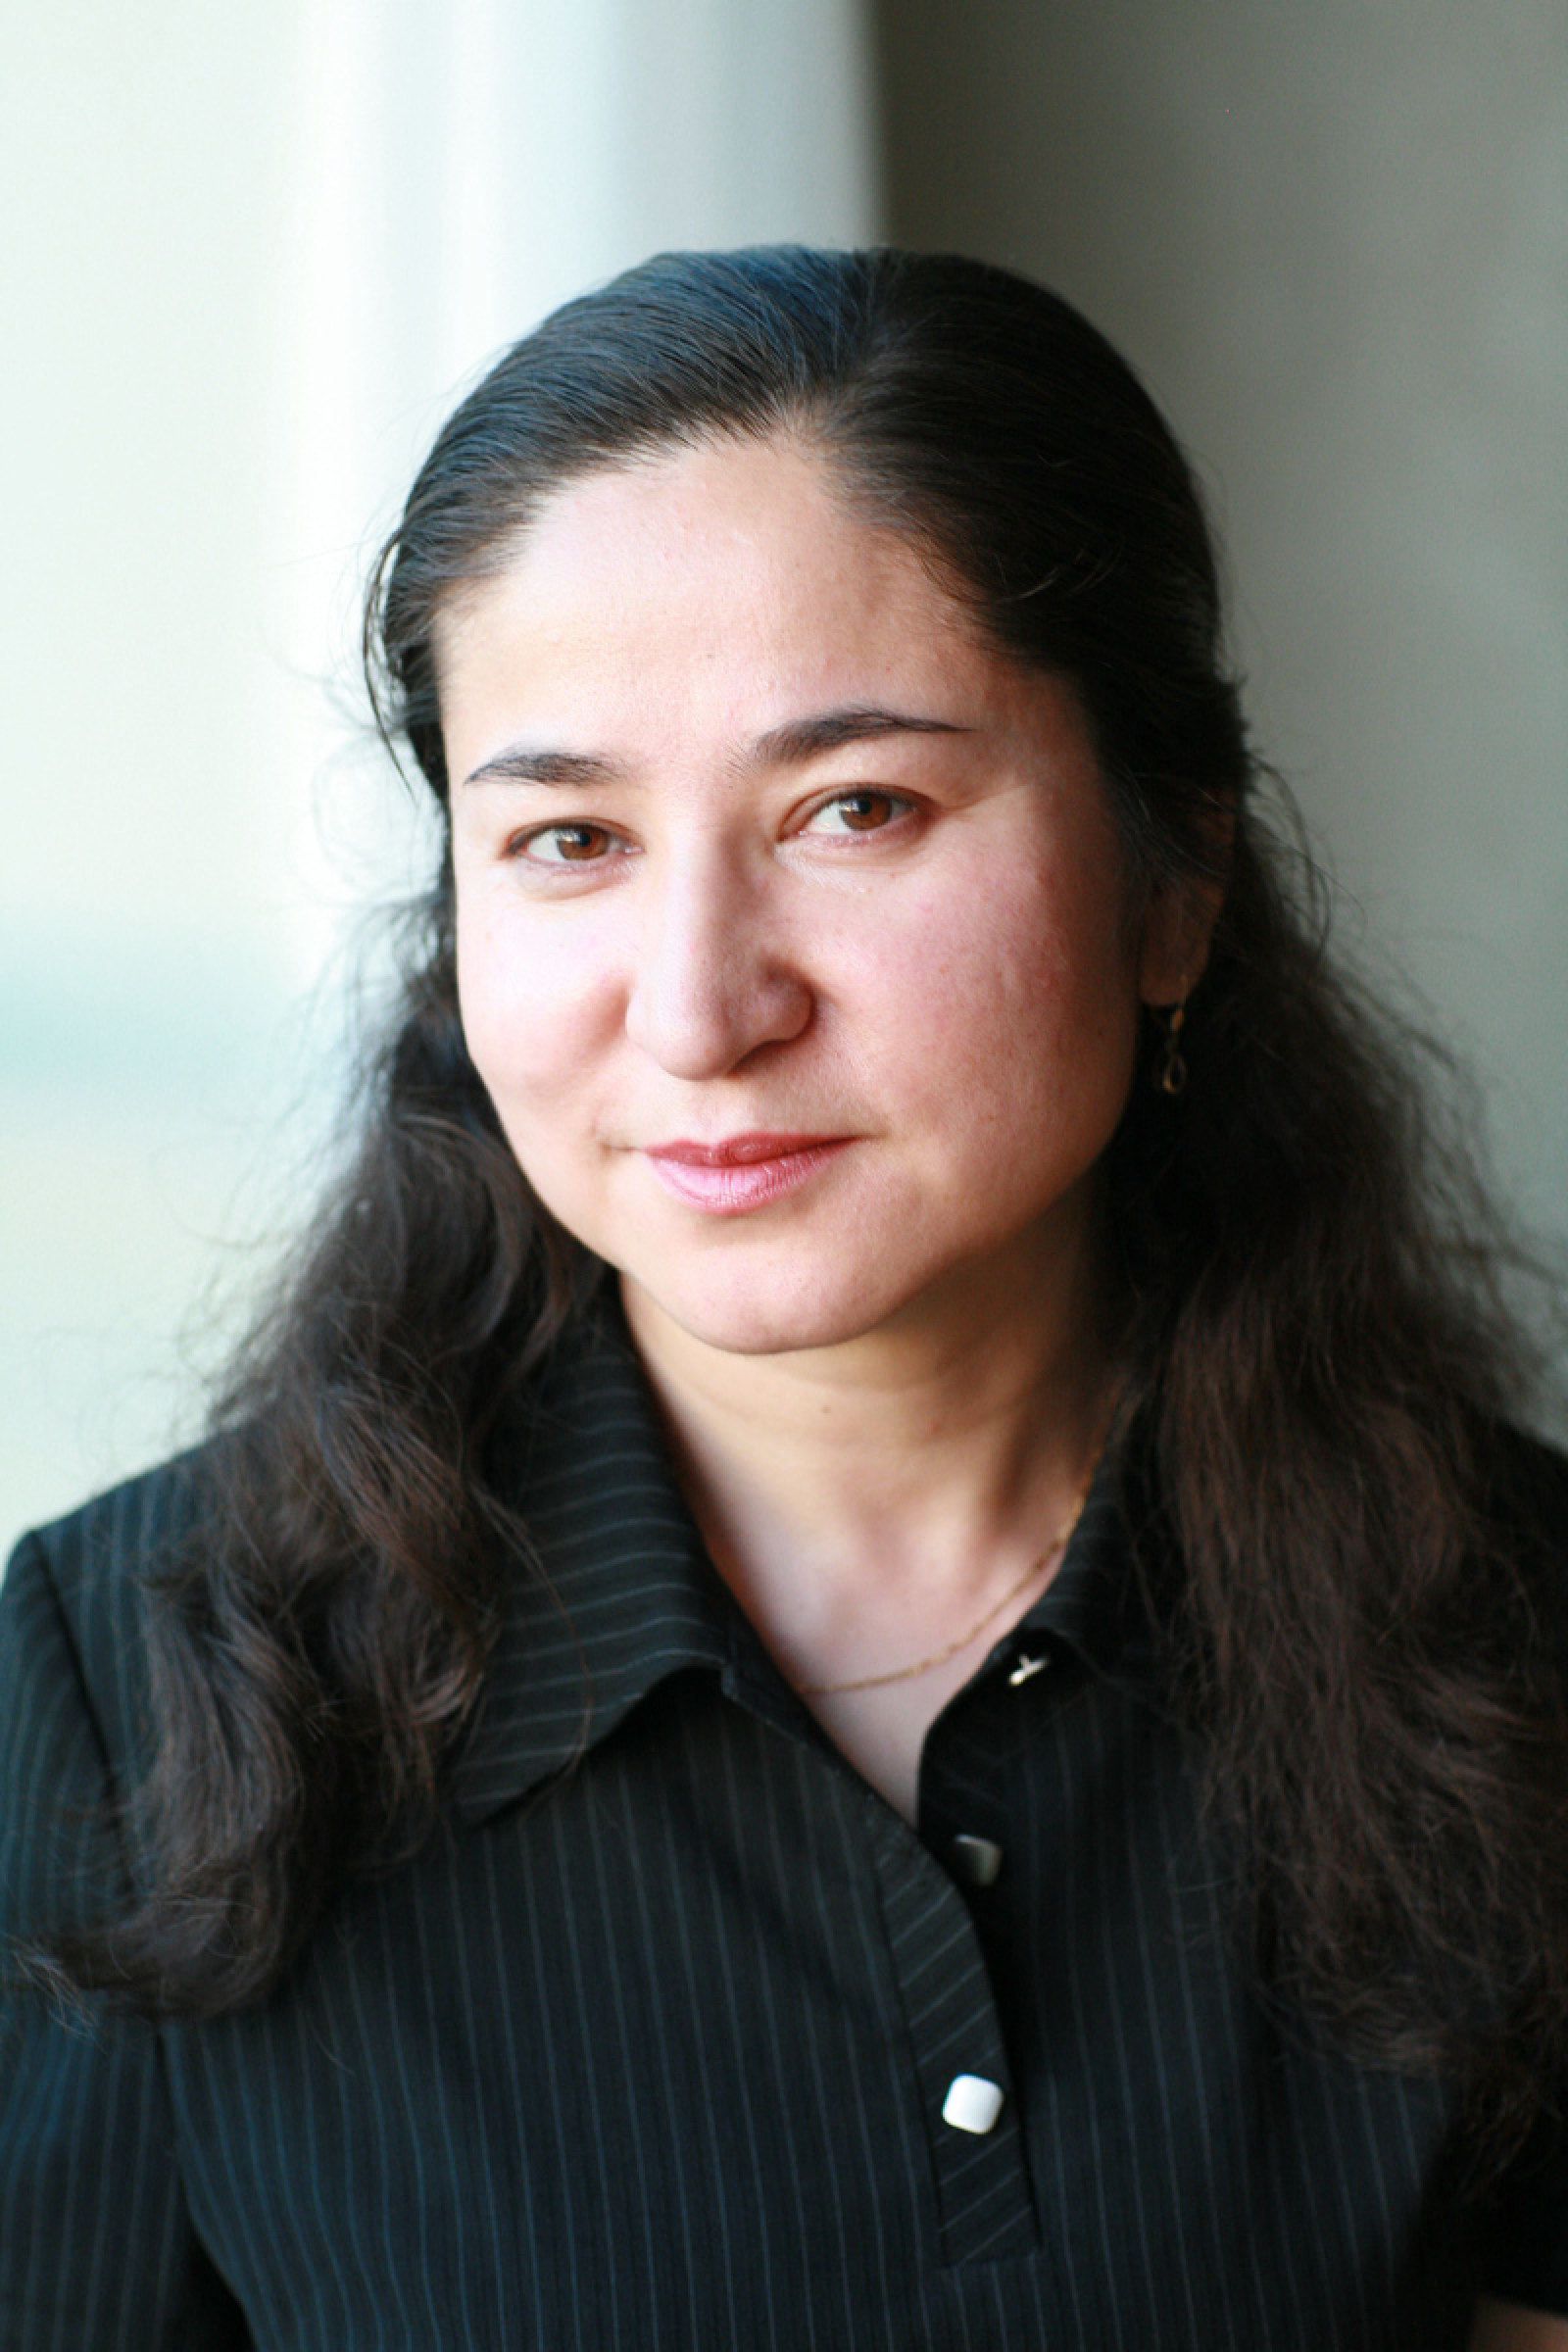 The Uygur anthropologist and folklorist Rahile Dawut is shown in China’s western Xinjiang region in 2006. The human rights group Dui Hua said last month that China had sentenced her to life behind bars for “endangering state security,” although Beijing has been silent about the case. Photo: Lisa Ross via AFP